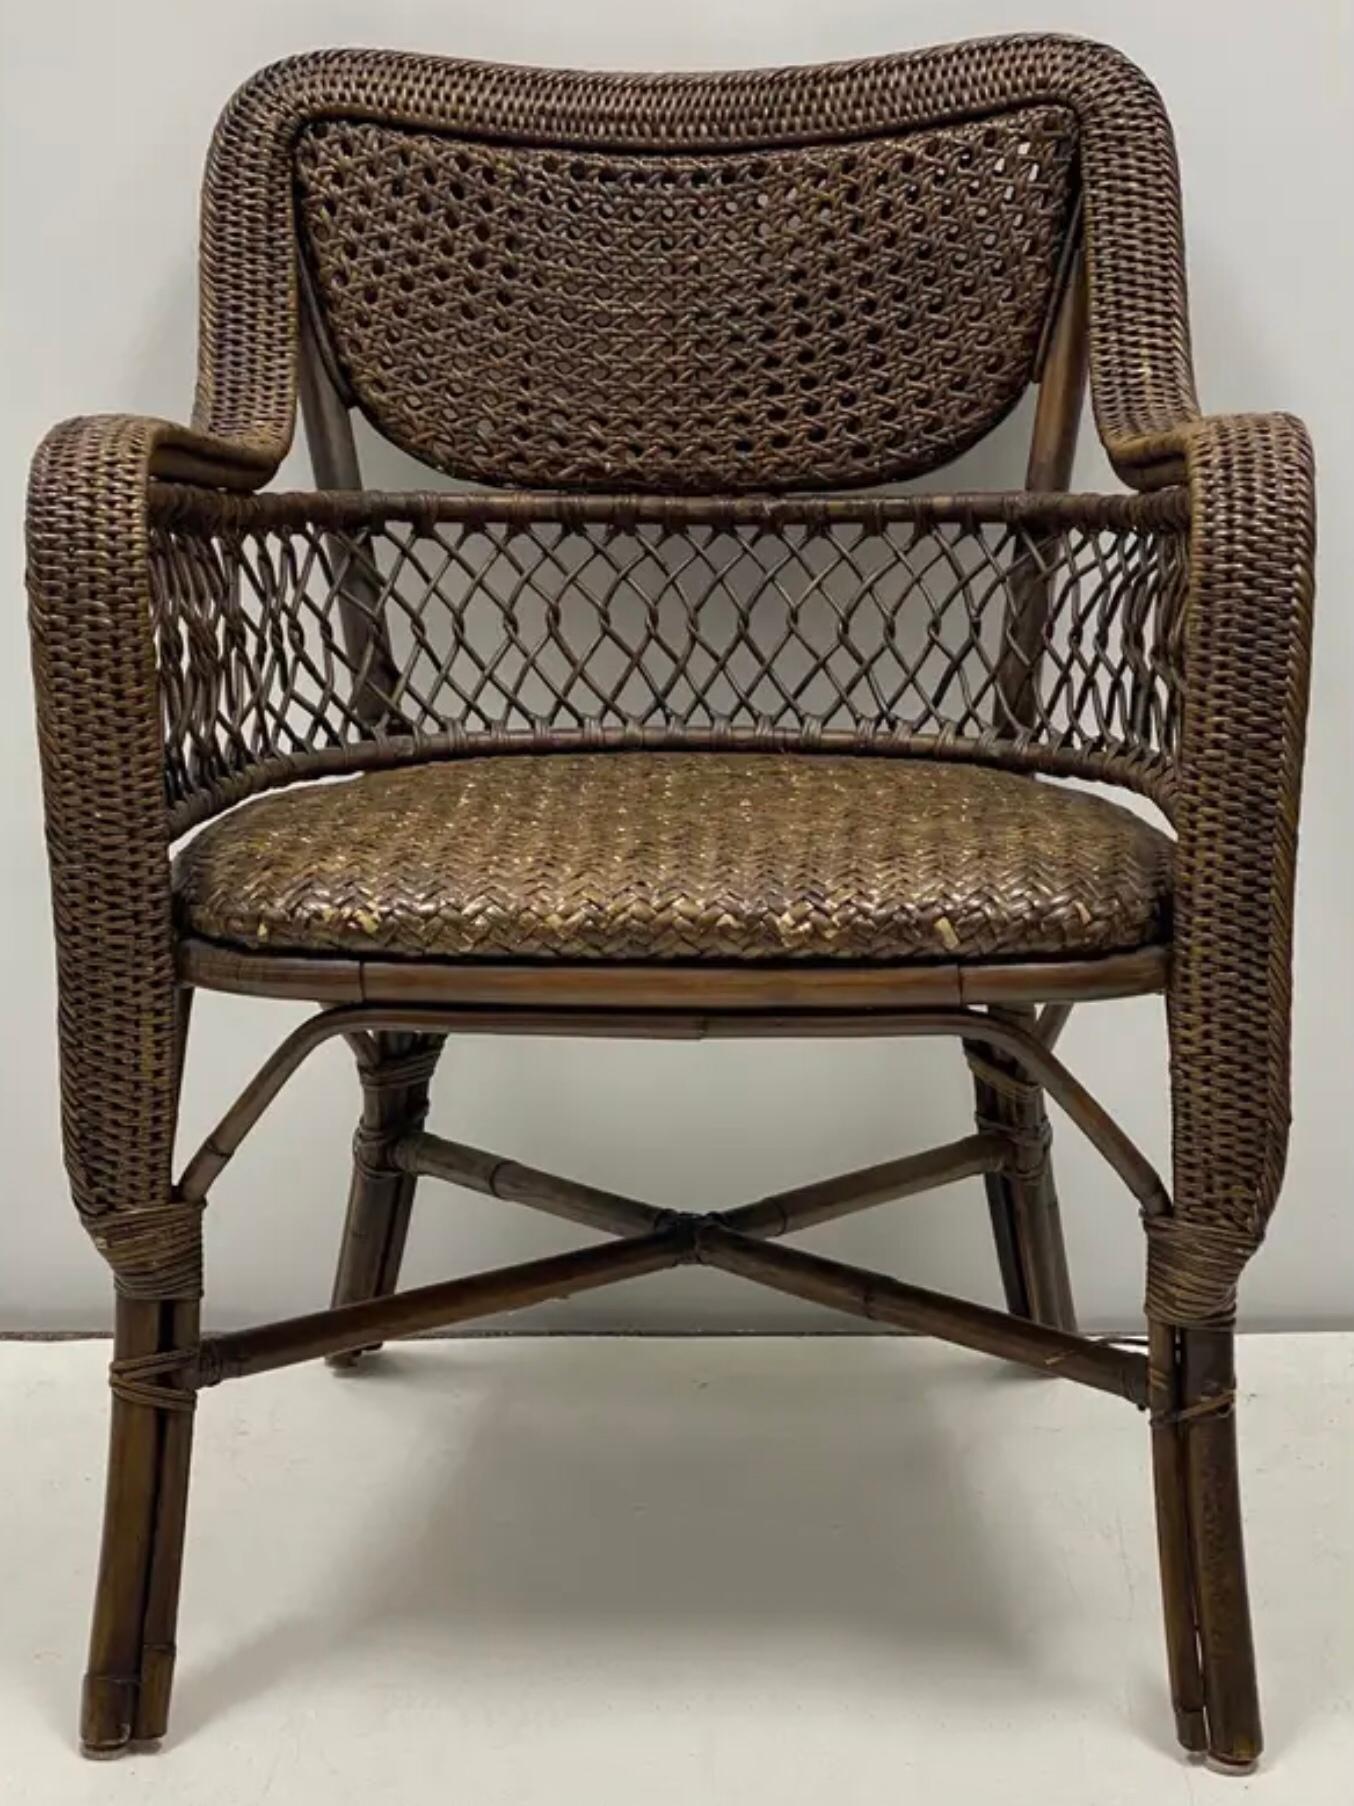 This is a pair of double caned and wicker arm chairs with British colonial styling by Palecek. They are marked and in very good condition.